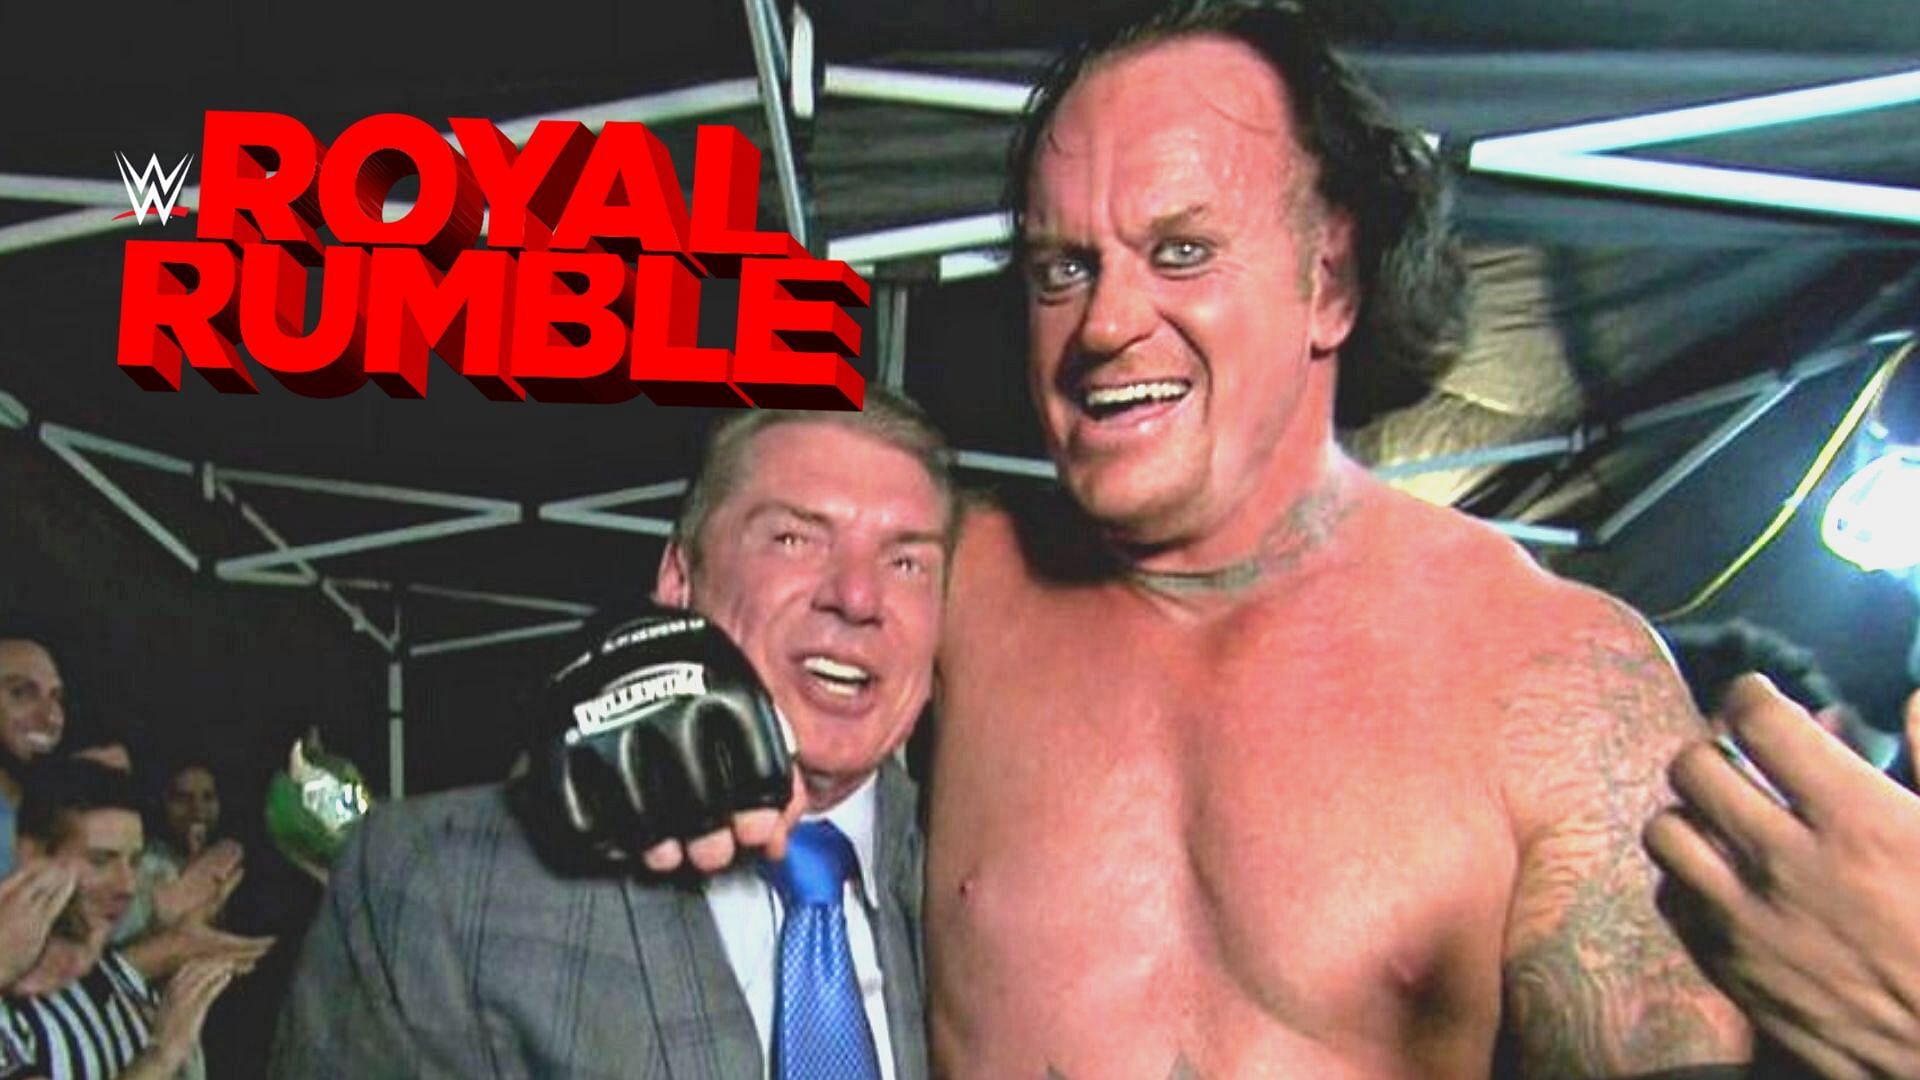 The Undertaker will be in St. Louis for Royal Rumble 2022.